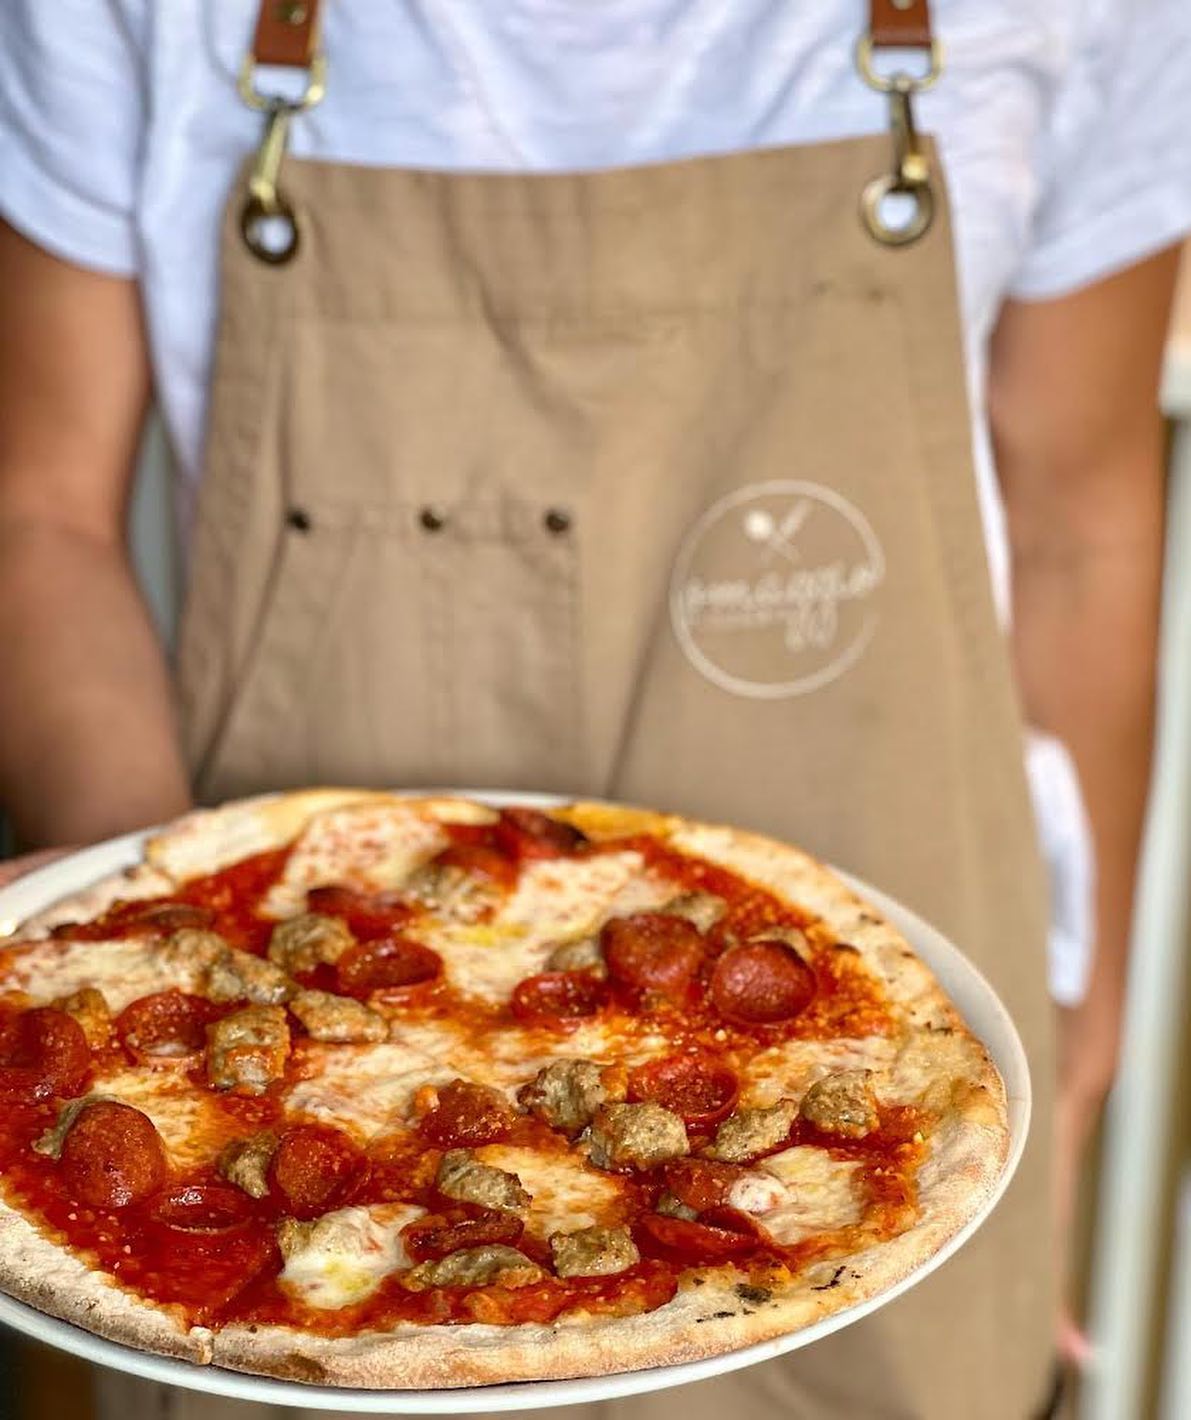 Pizzeria Omaggio pays tribute to the art of pizza making and relies entirely on fresh, quality ingredients. Expect to enjoy an authentic, Italian experience each and ever time.